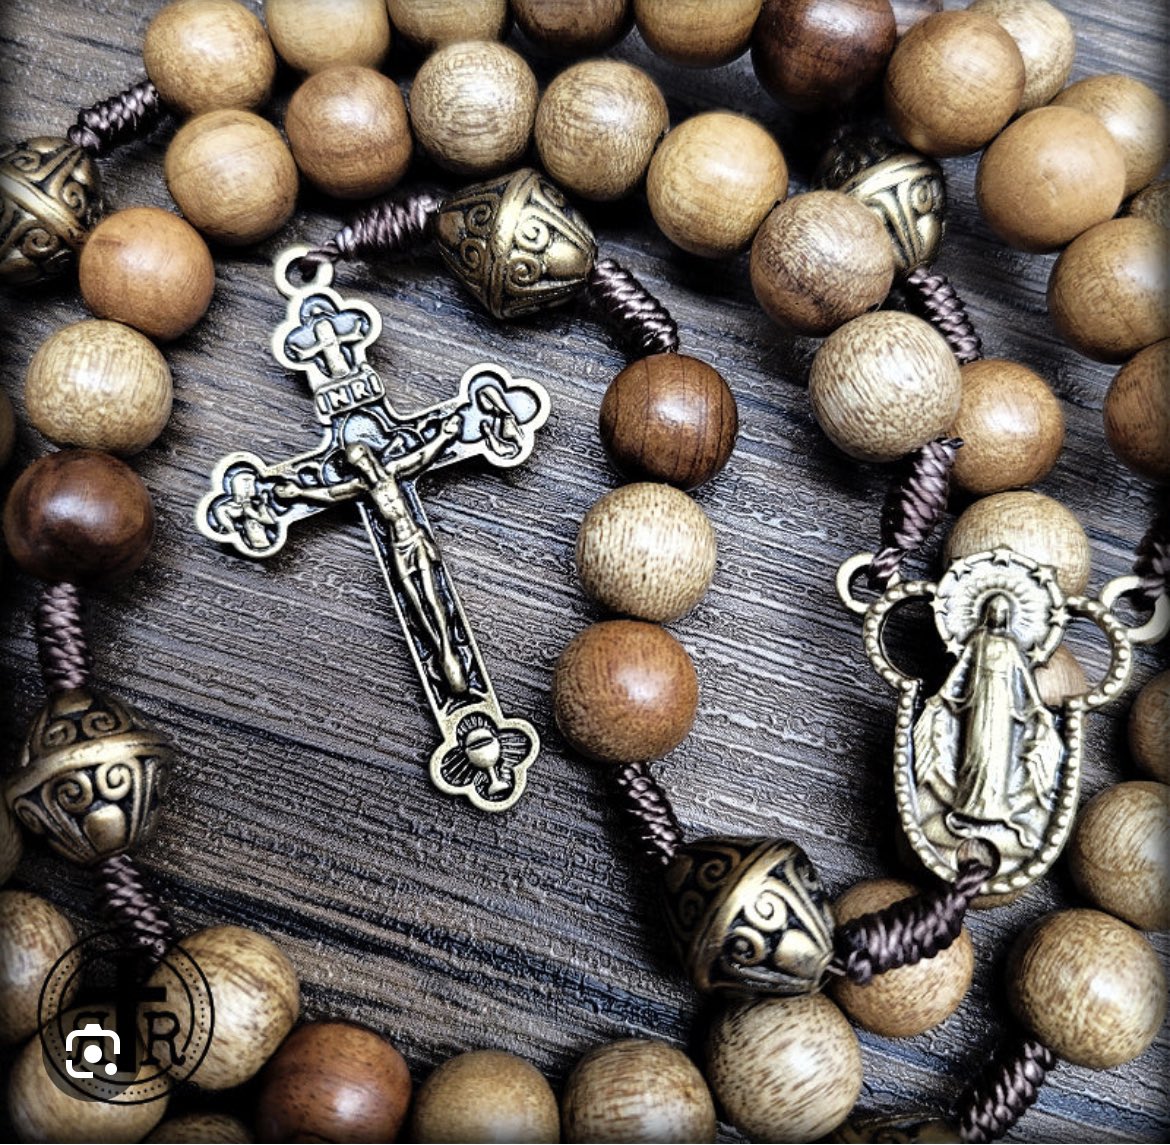 October is the month of the #Rosary .  #gloriousmysteries #Romanempire